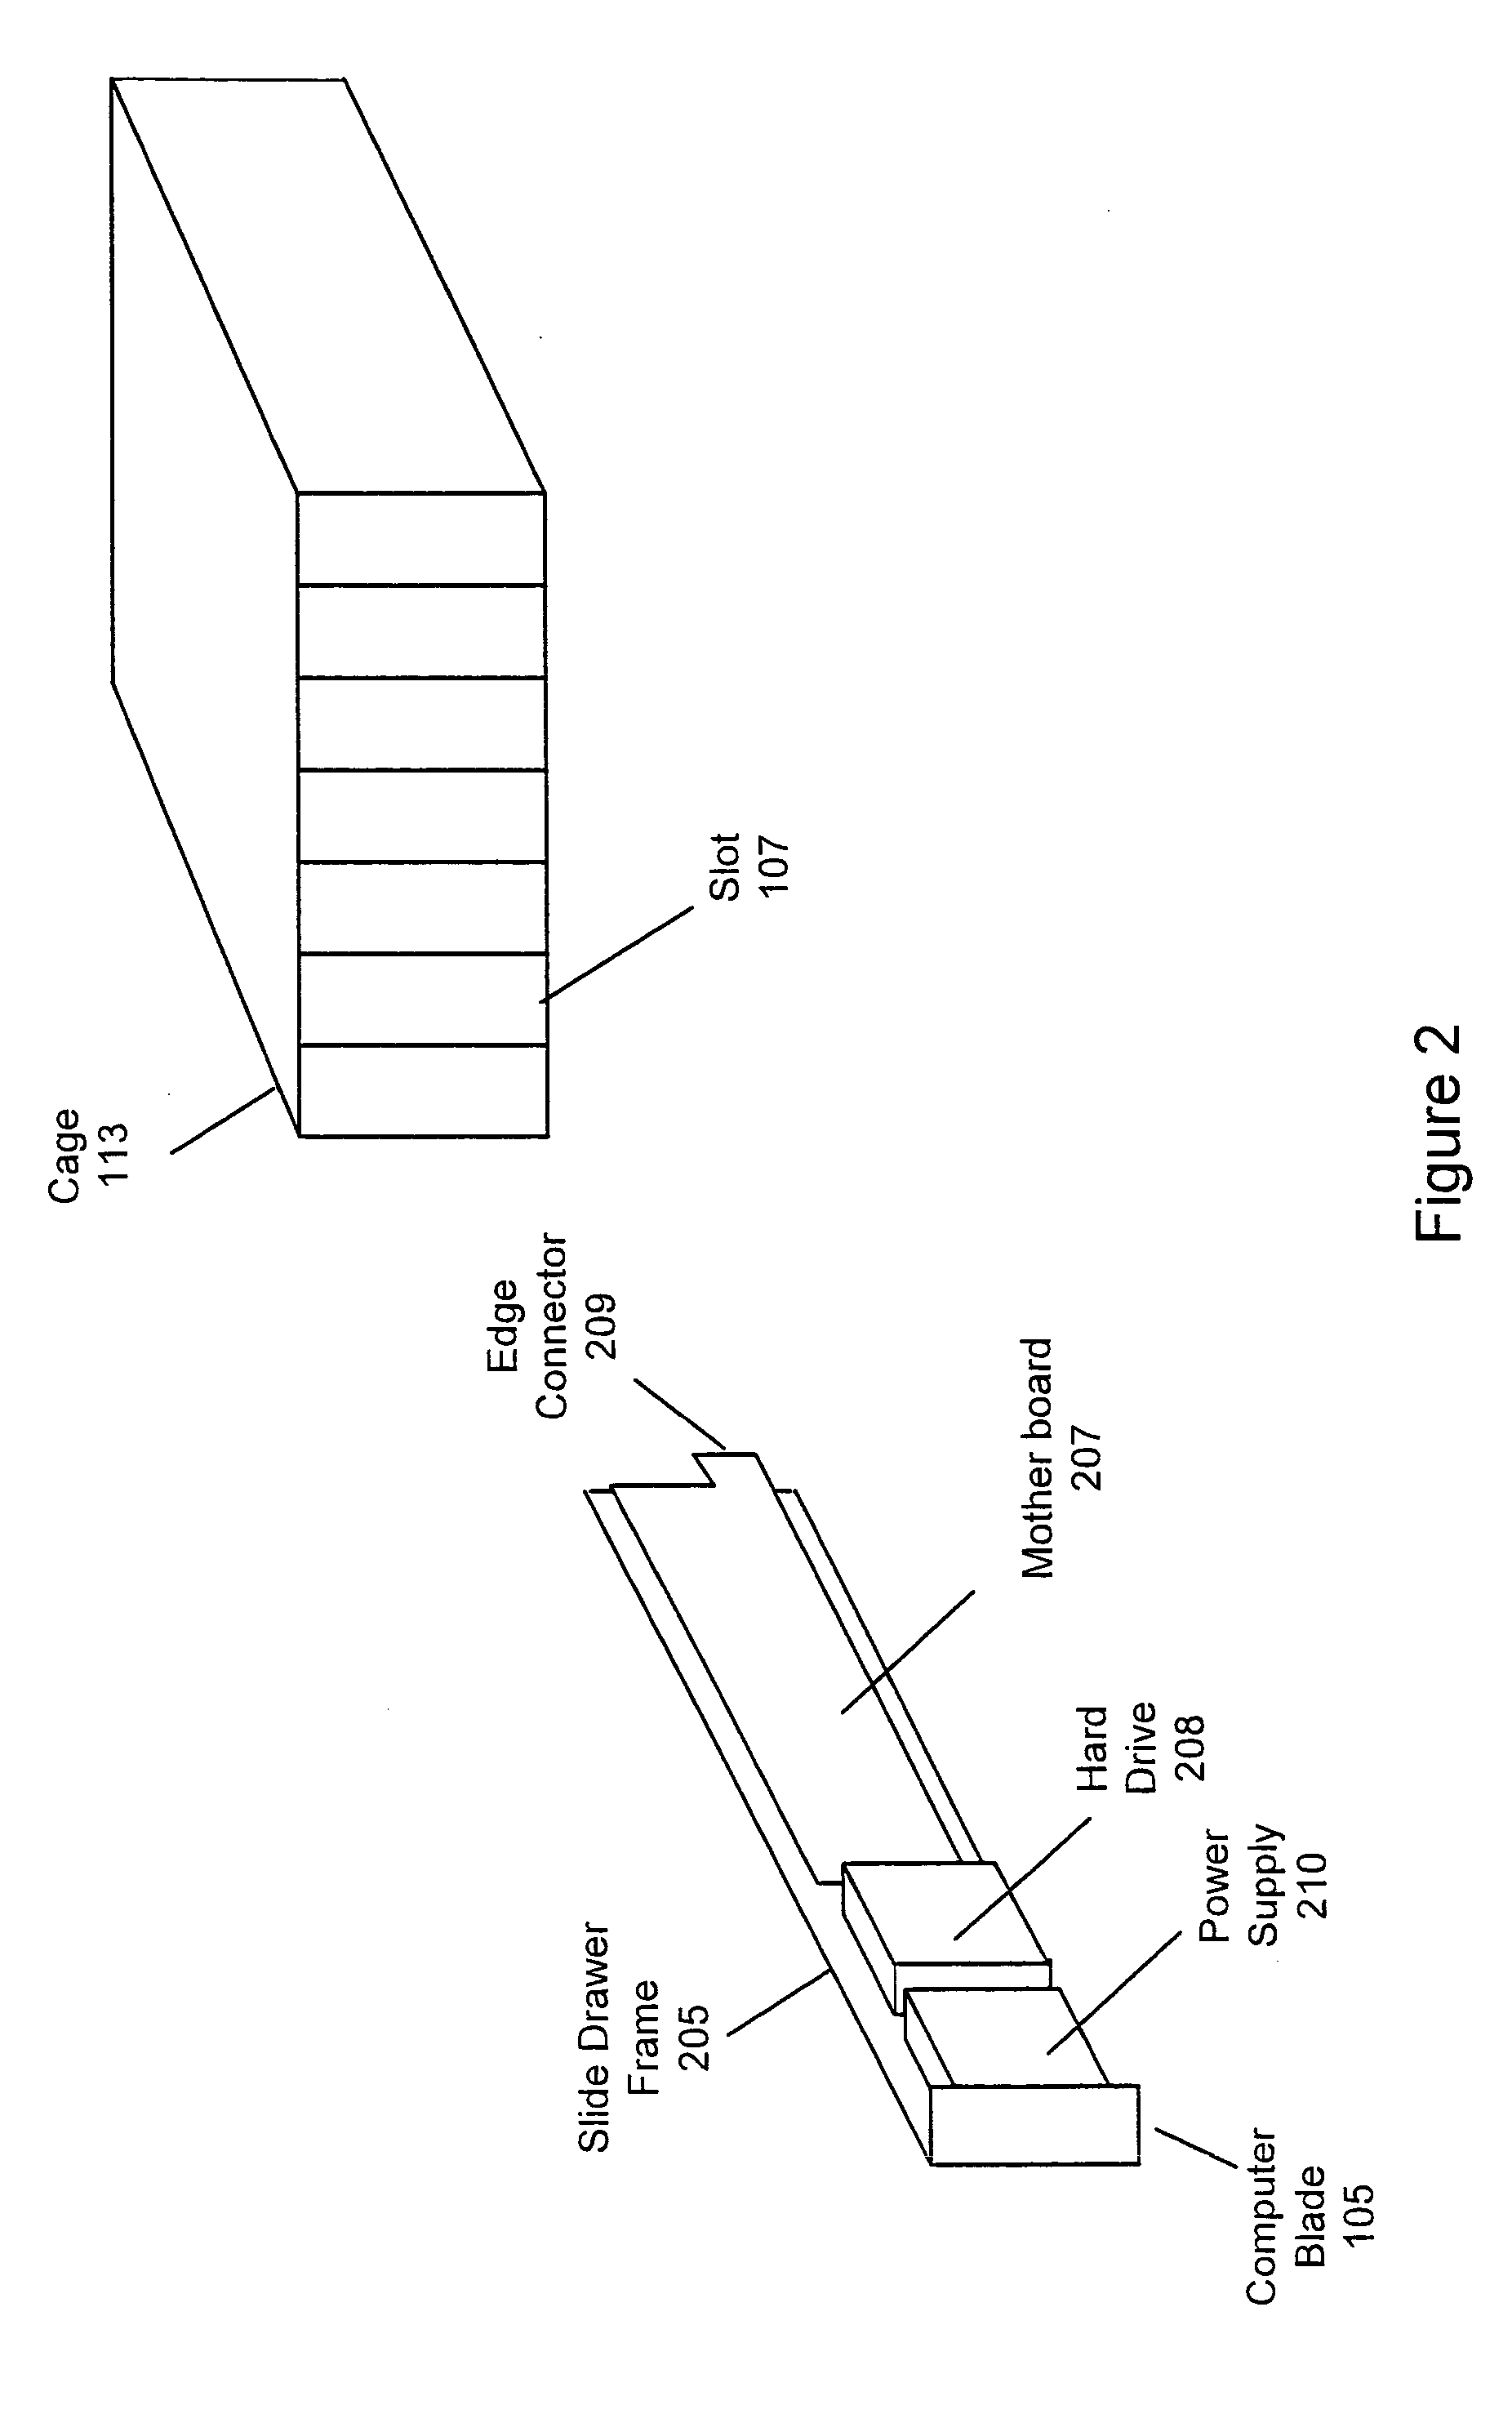 System and method for multi-functional XML-capable software applications on a peer-to-peer network